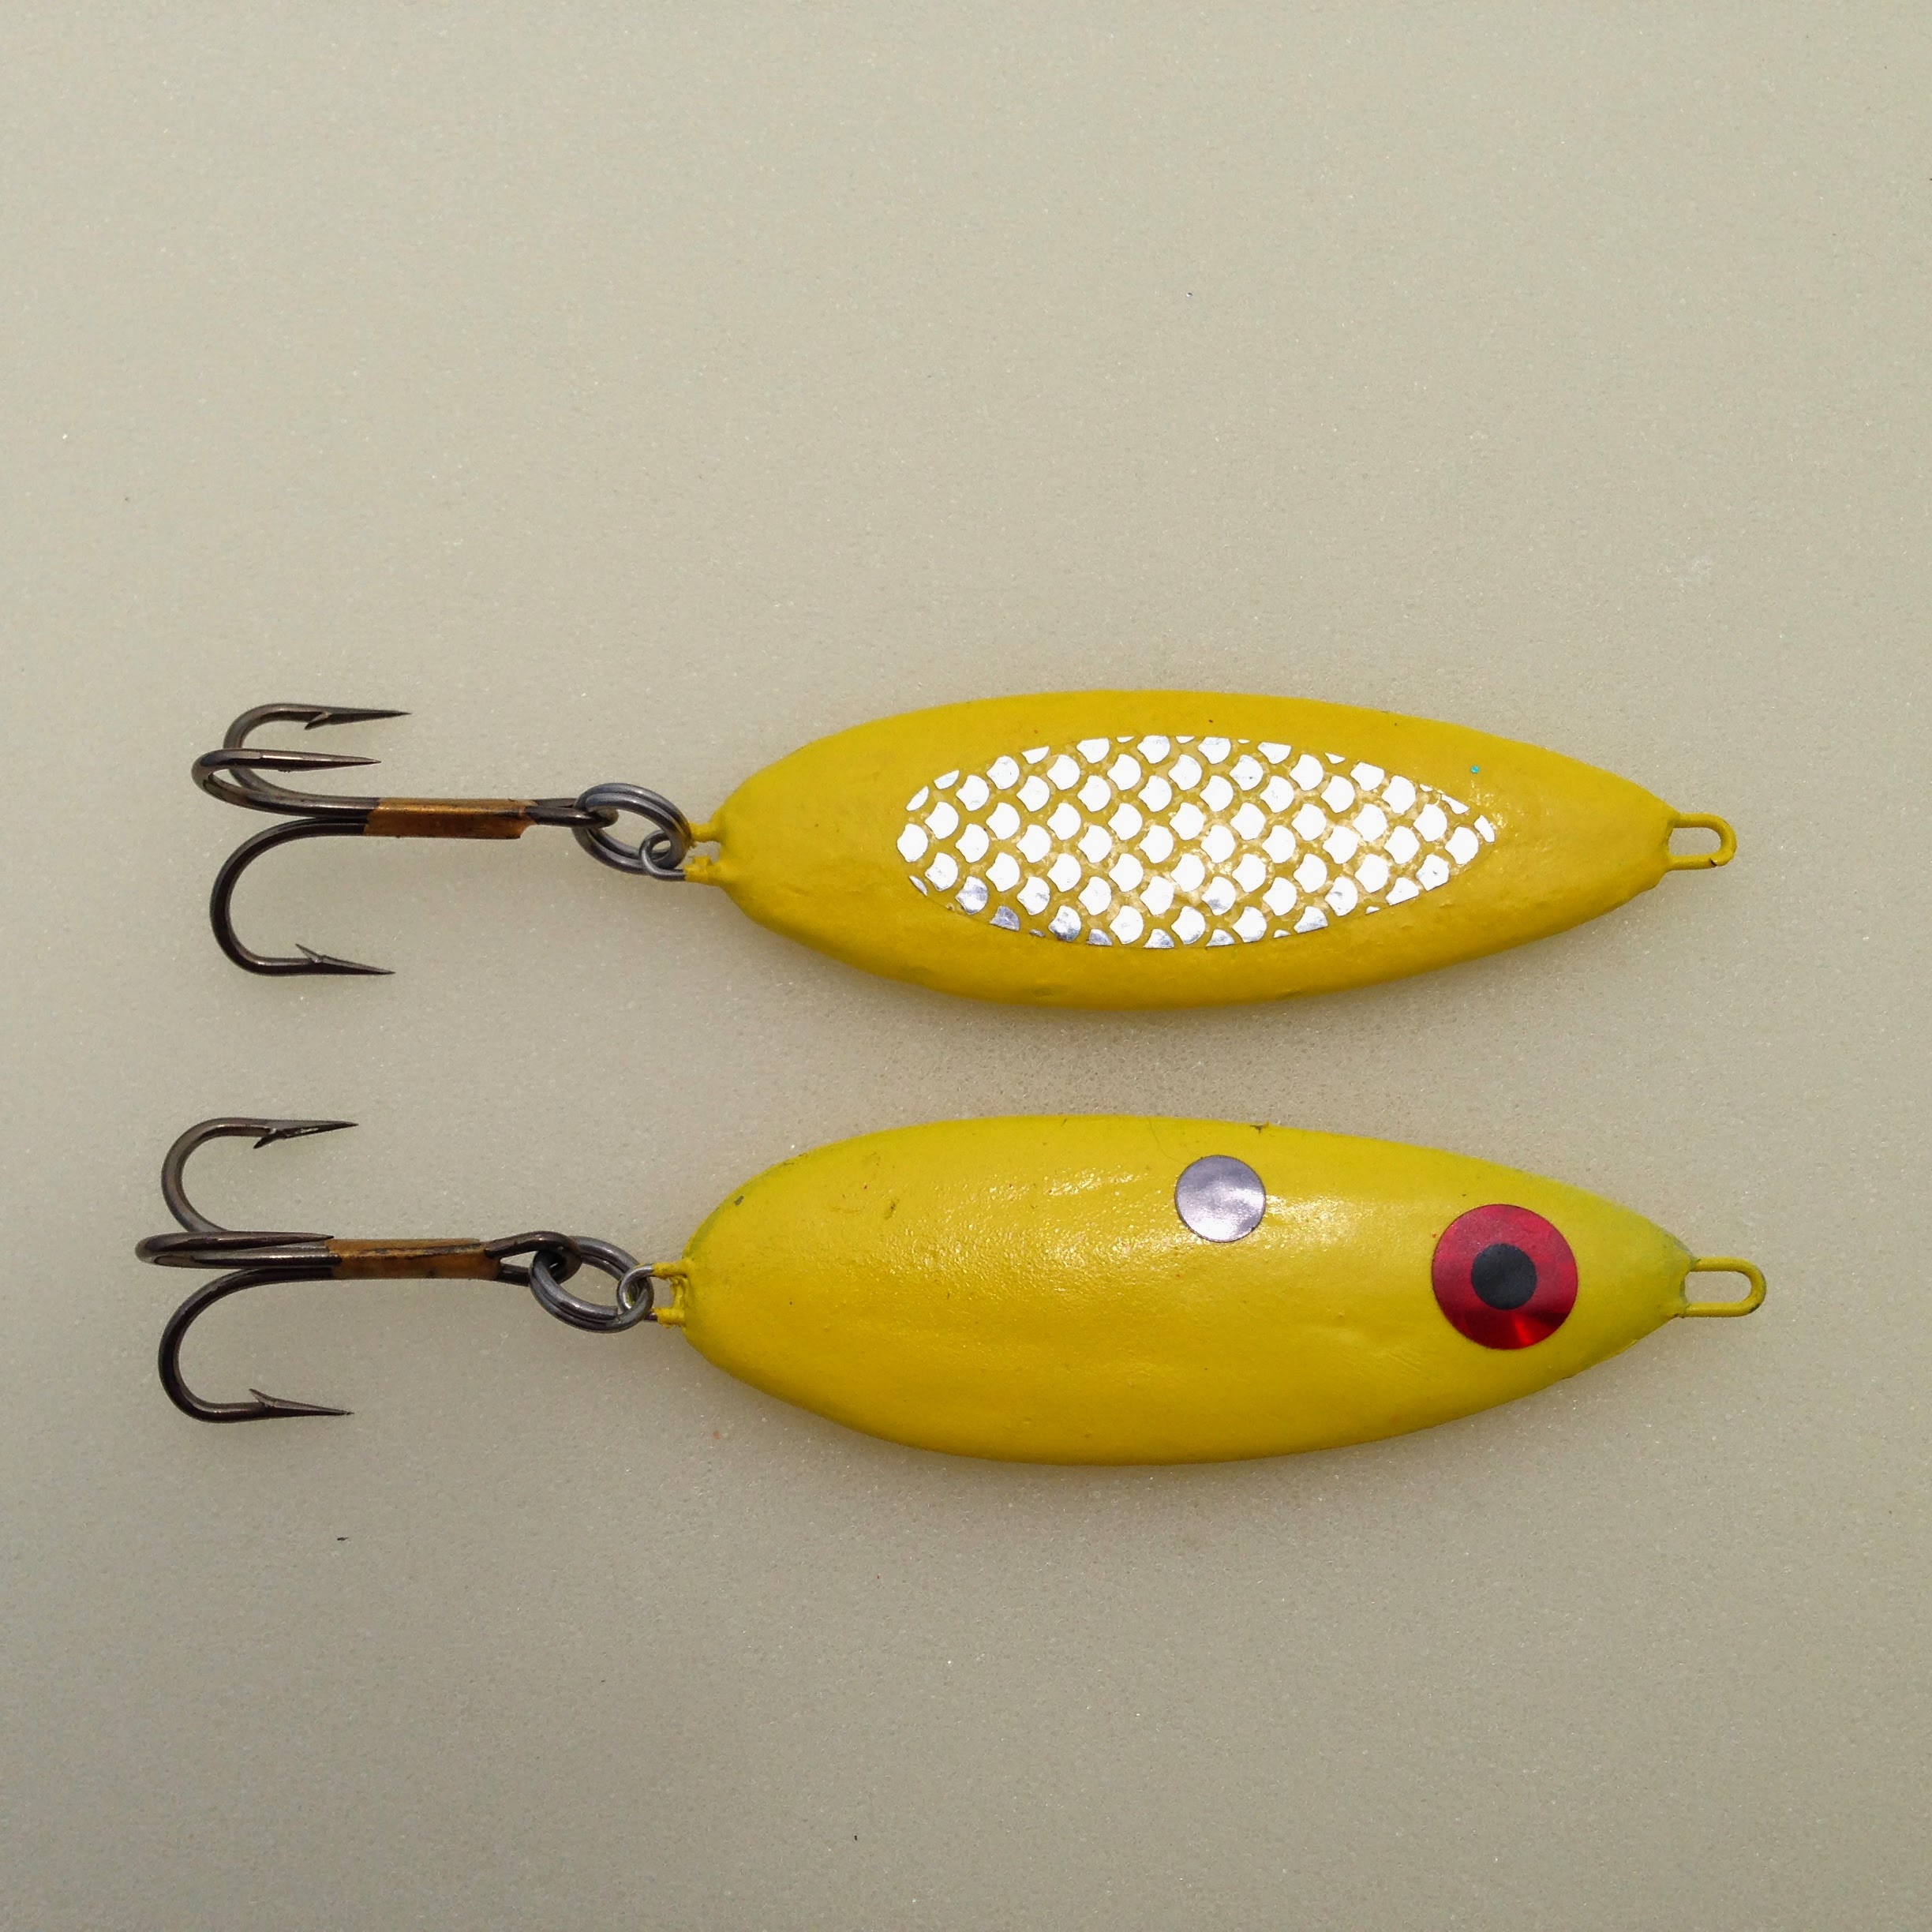 What trailer for this jig - Fishing Tackle - Bass Fishing Forums